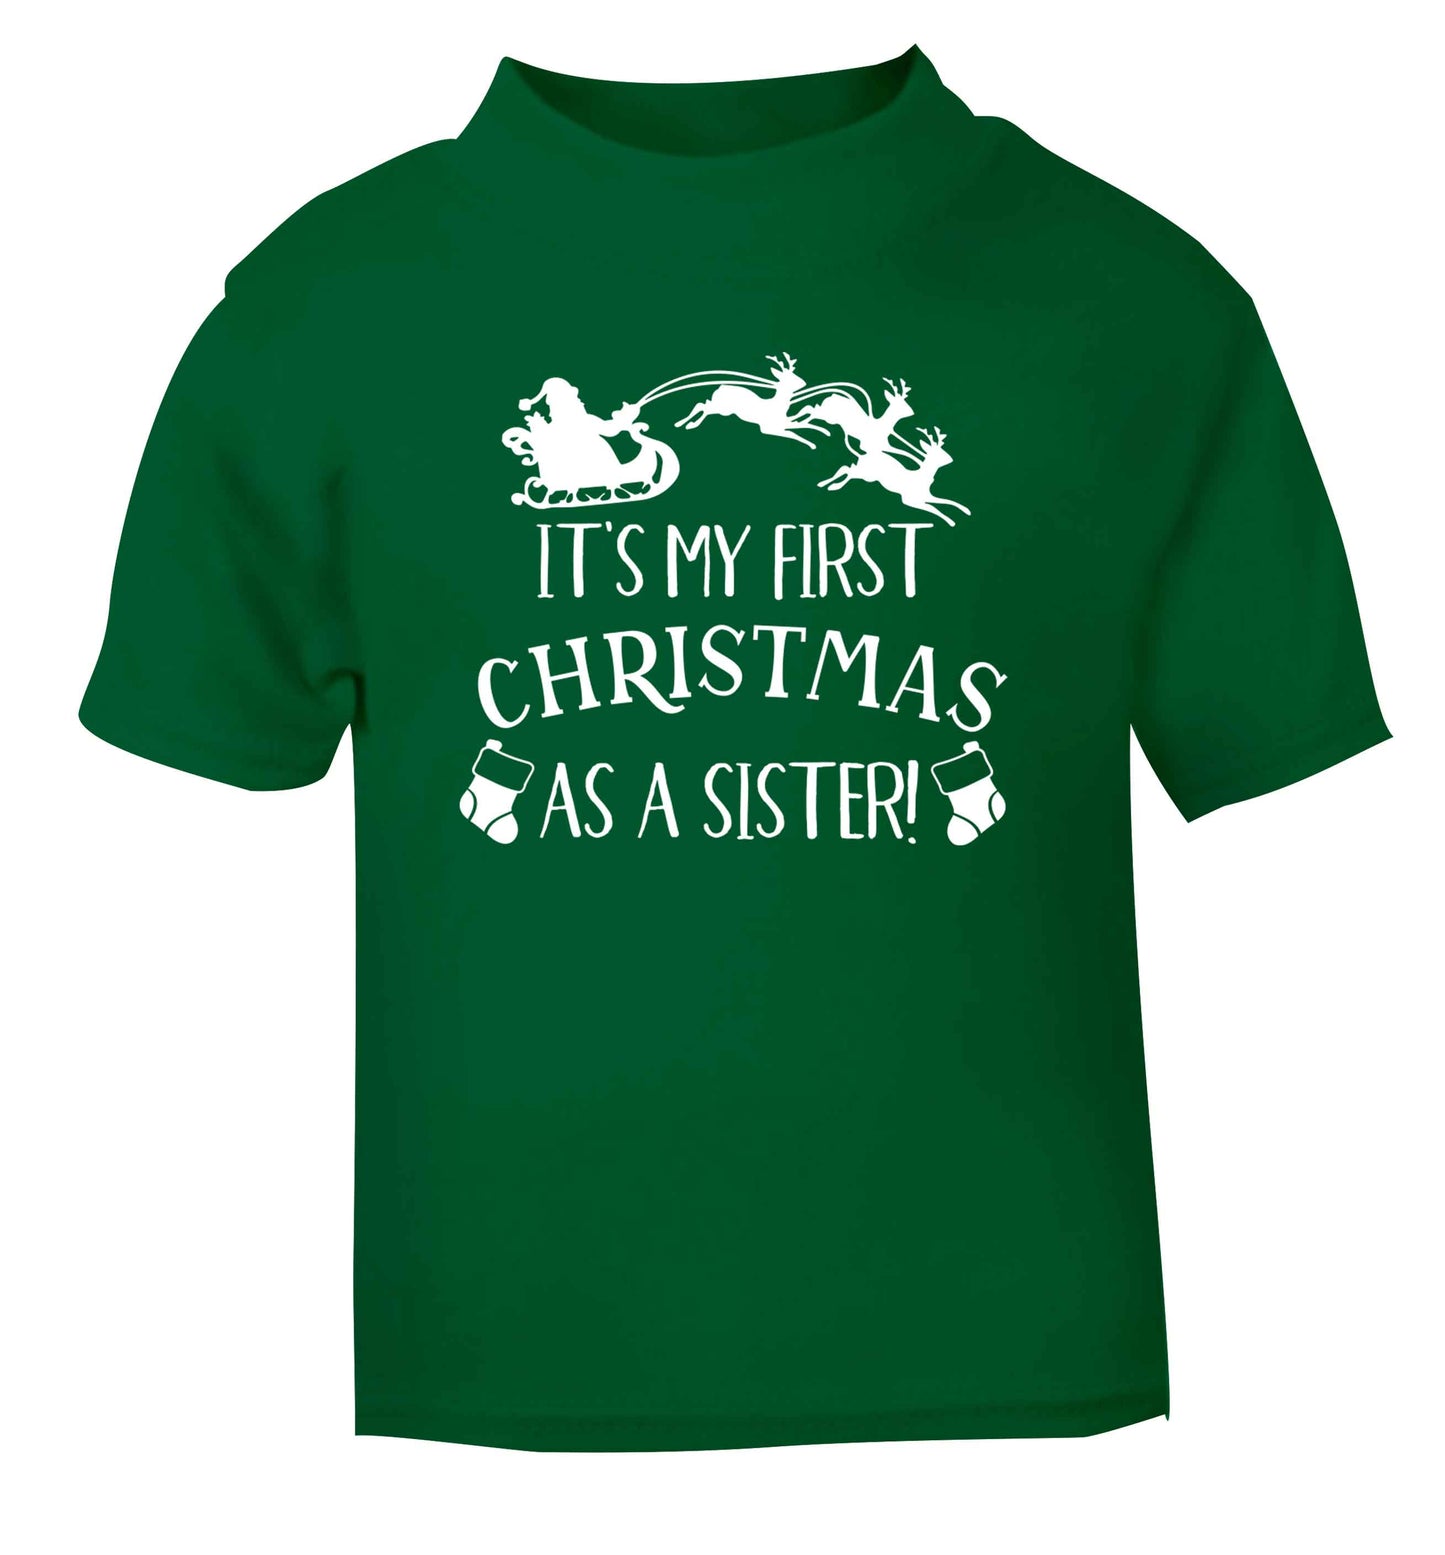 It's my first Christmas as a sister! green Baby Toddler Tshirt 2 Years